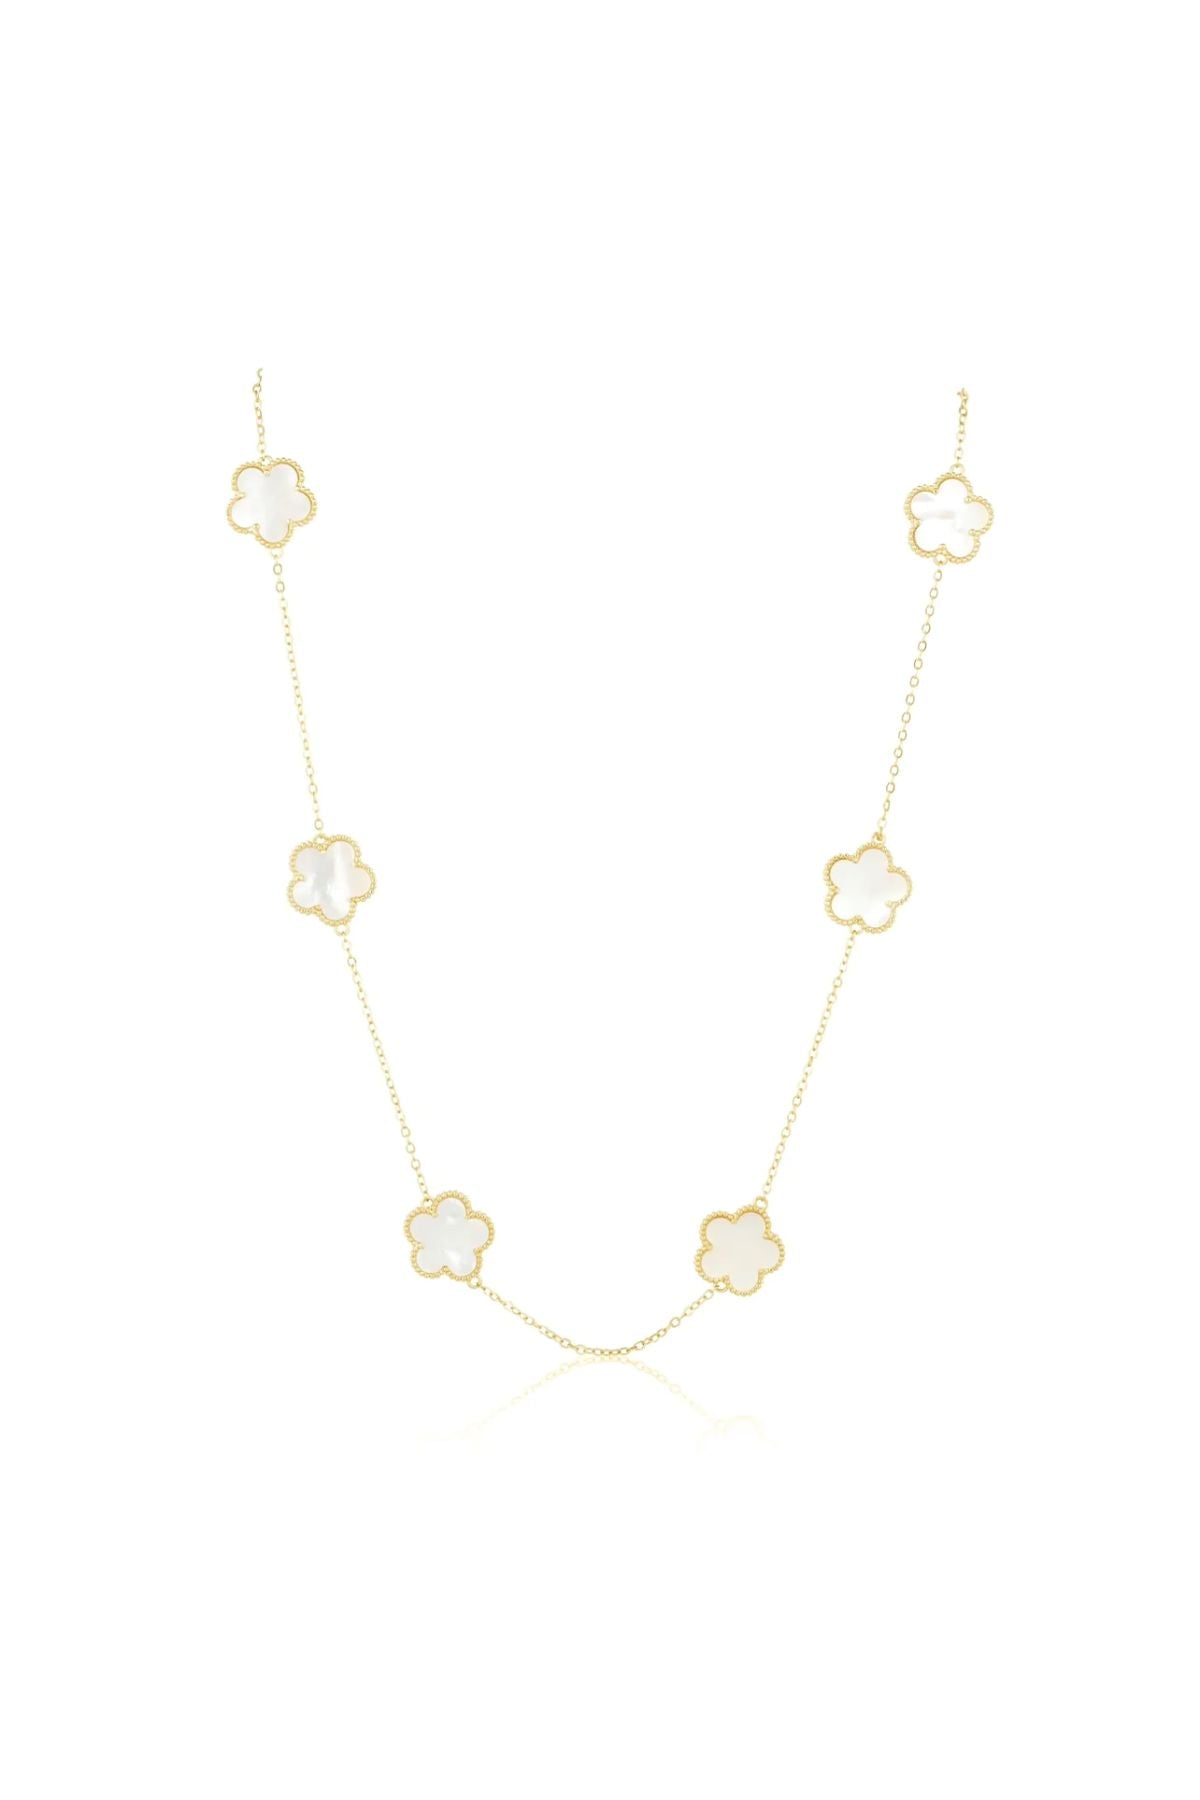 White and gold clover necklace